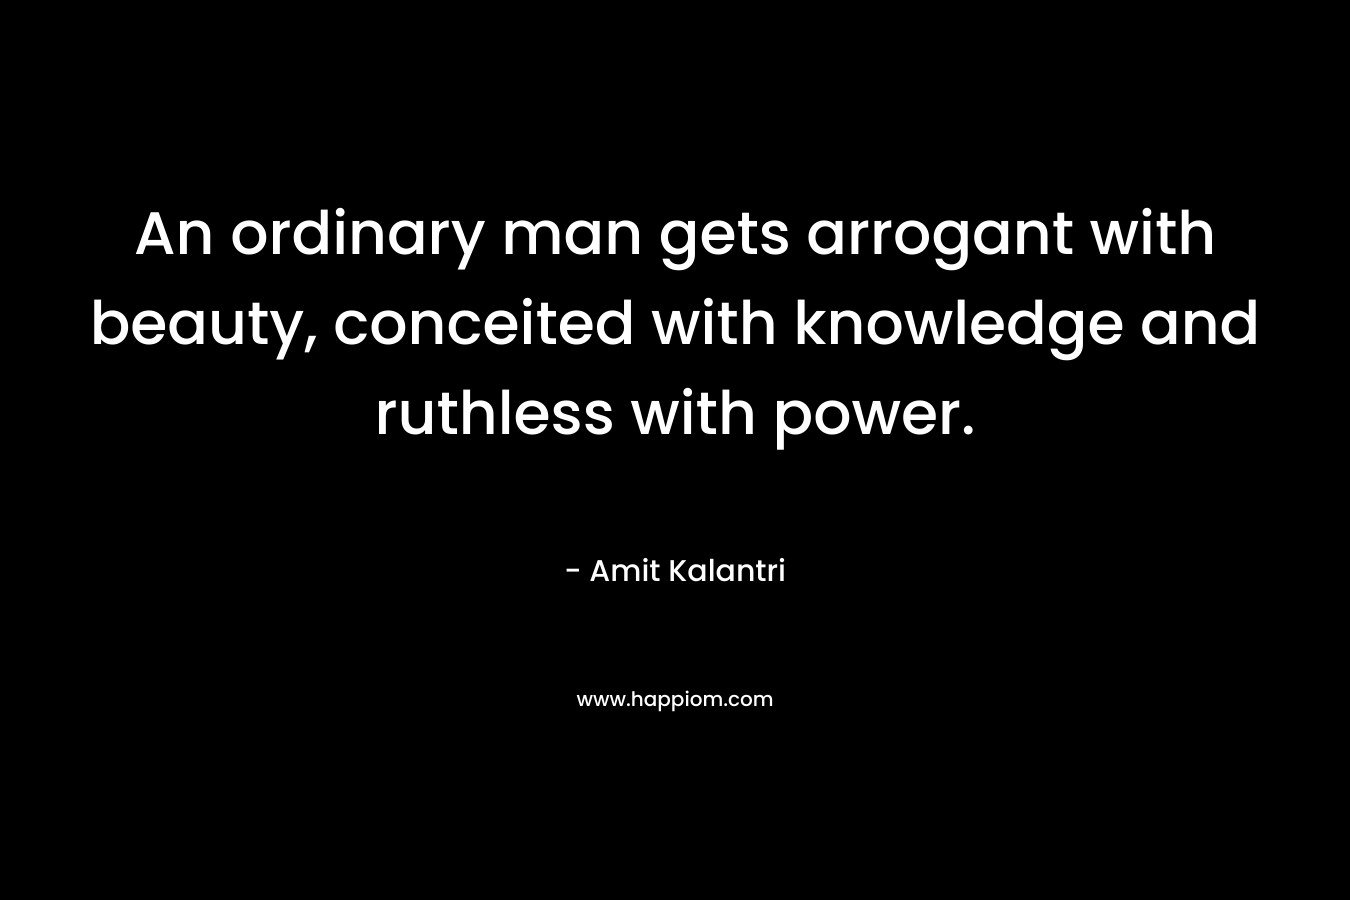 An ordinary man gets arrogant with beauty, conceited with knowledge and ruthless with power.